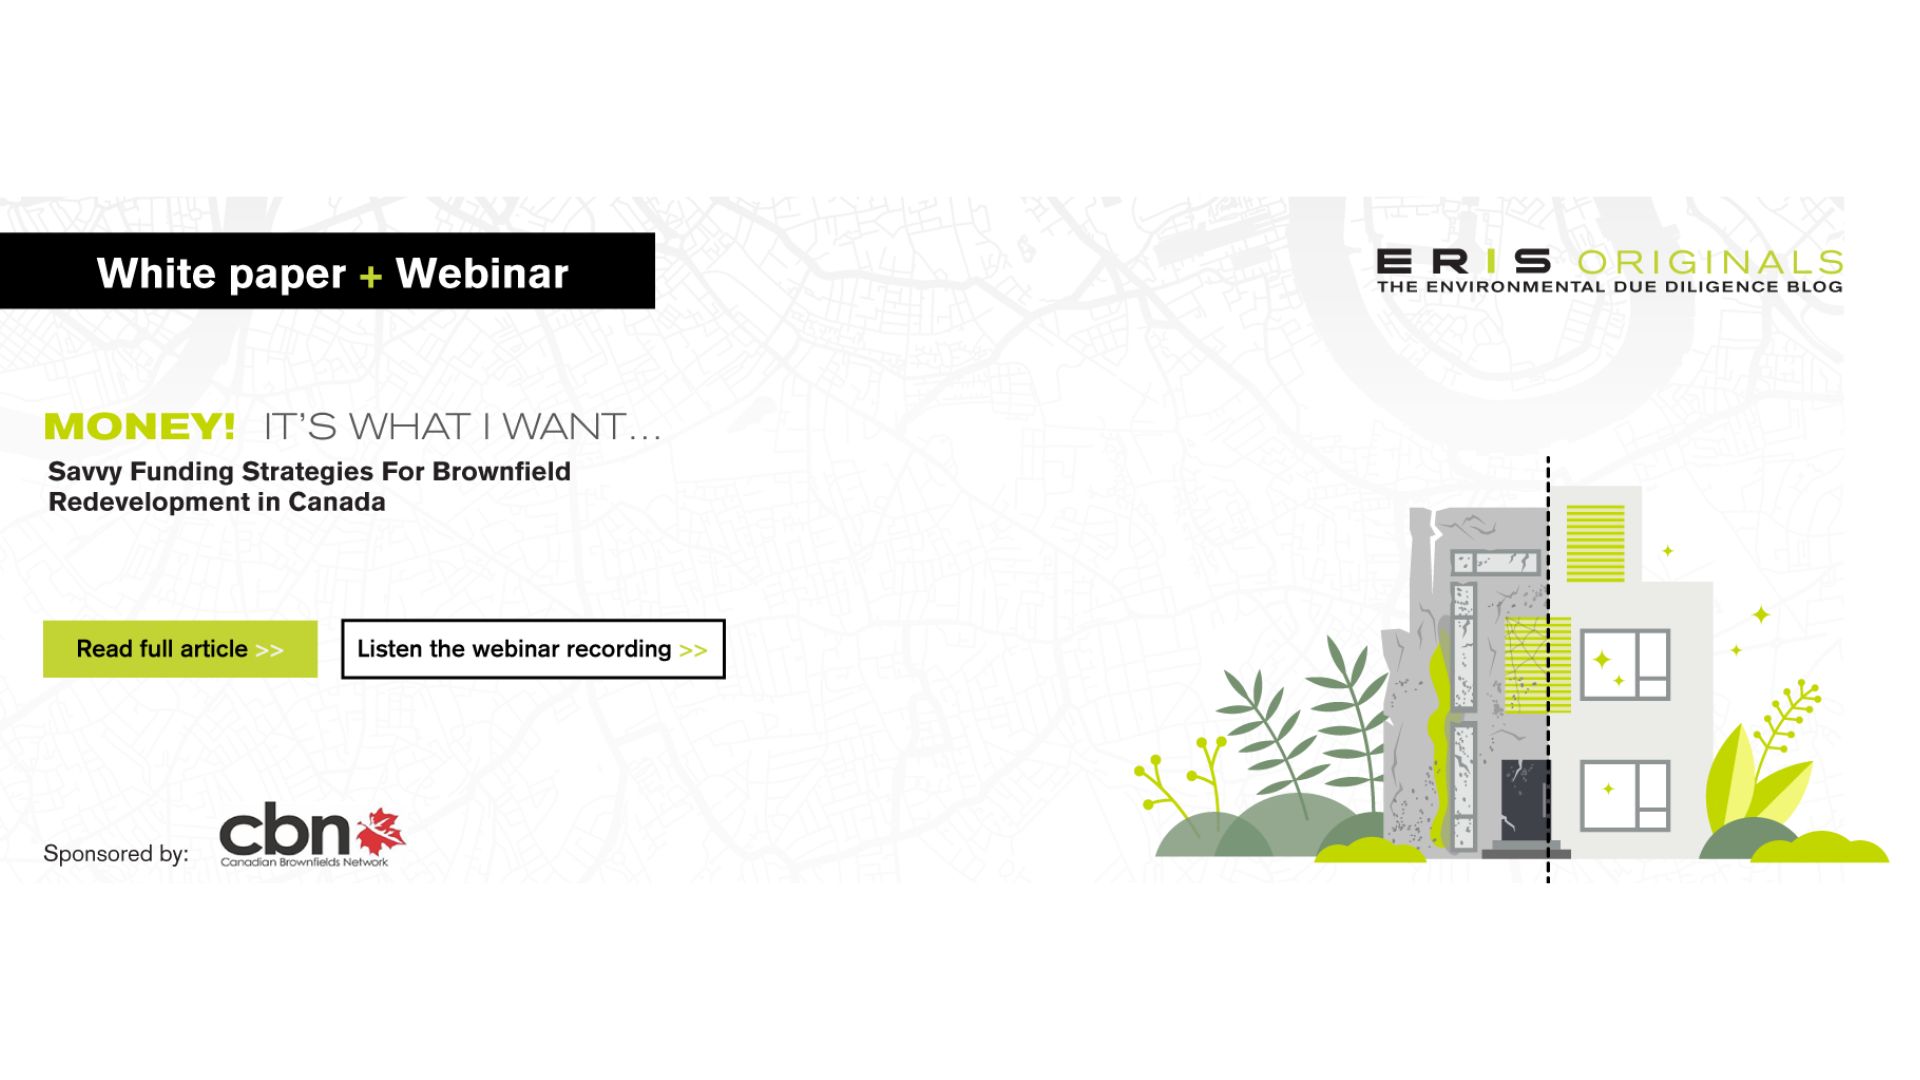 Webinar – Introduction to Tax Increment Financing for Brownfield Redevelopment in Canada